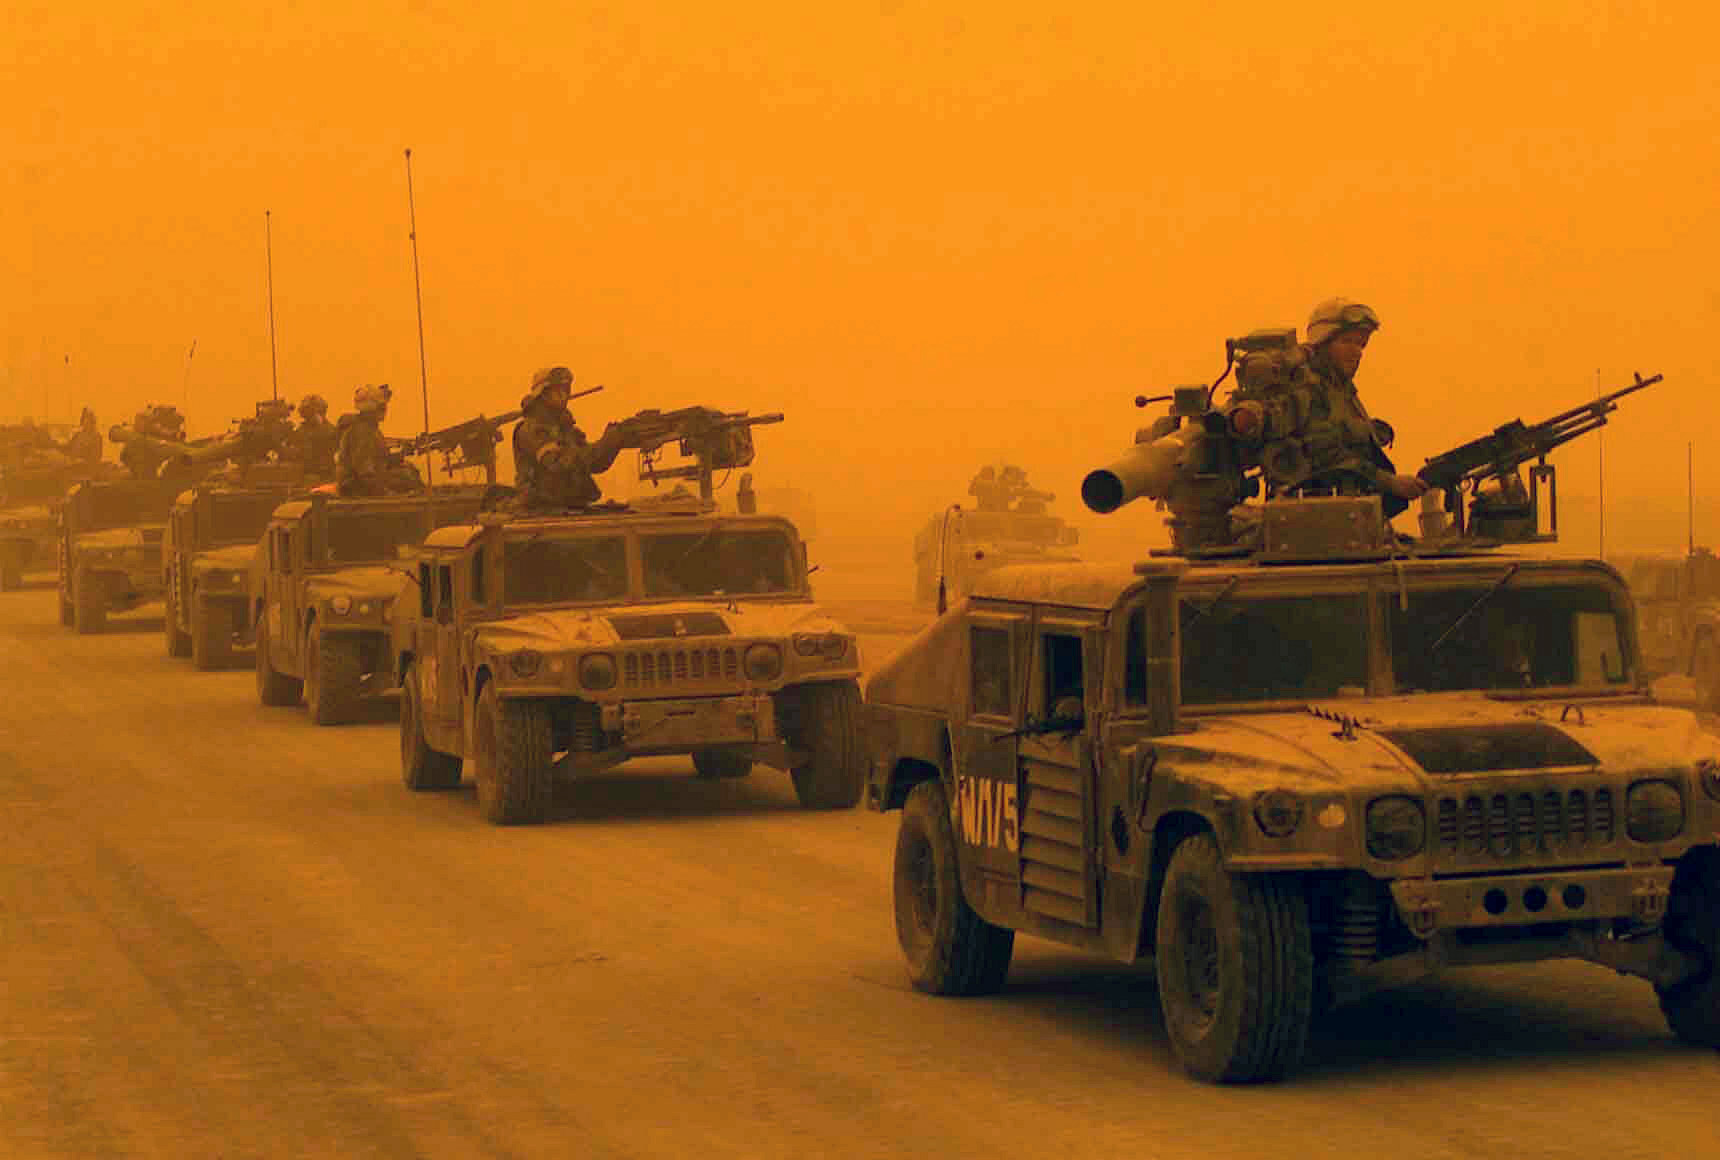 A convoy of U.S. Marines arrive in Northern Iraq during a sandstorm, 2003. 